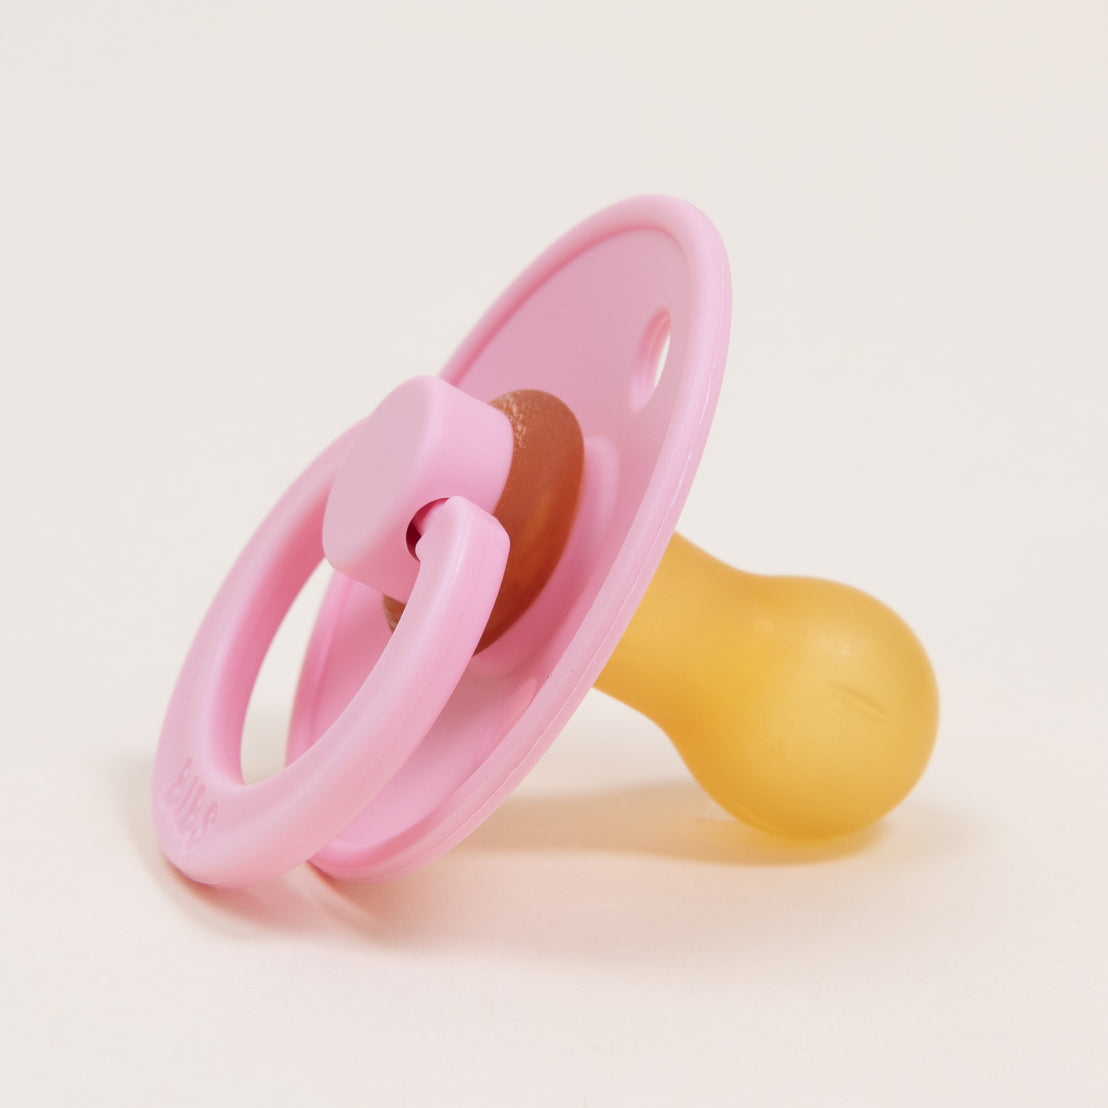 A Baby Pink Bibs Pacifier lying on a plain, light beige background. The pacifier has a prominent pink handle and shield with a yellow nipple.